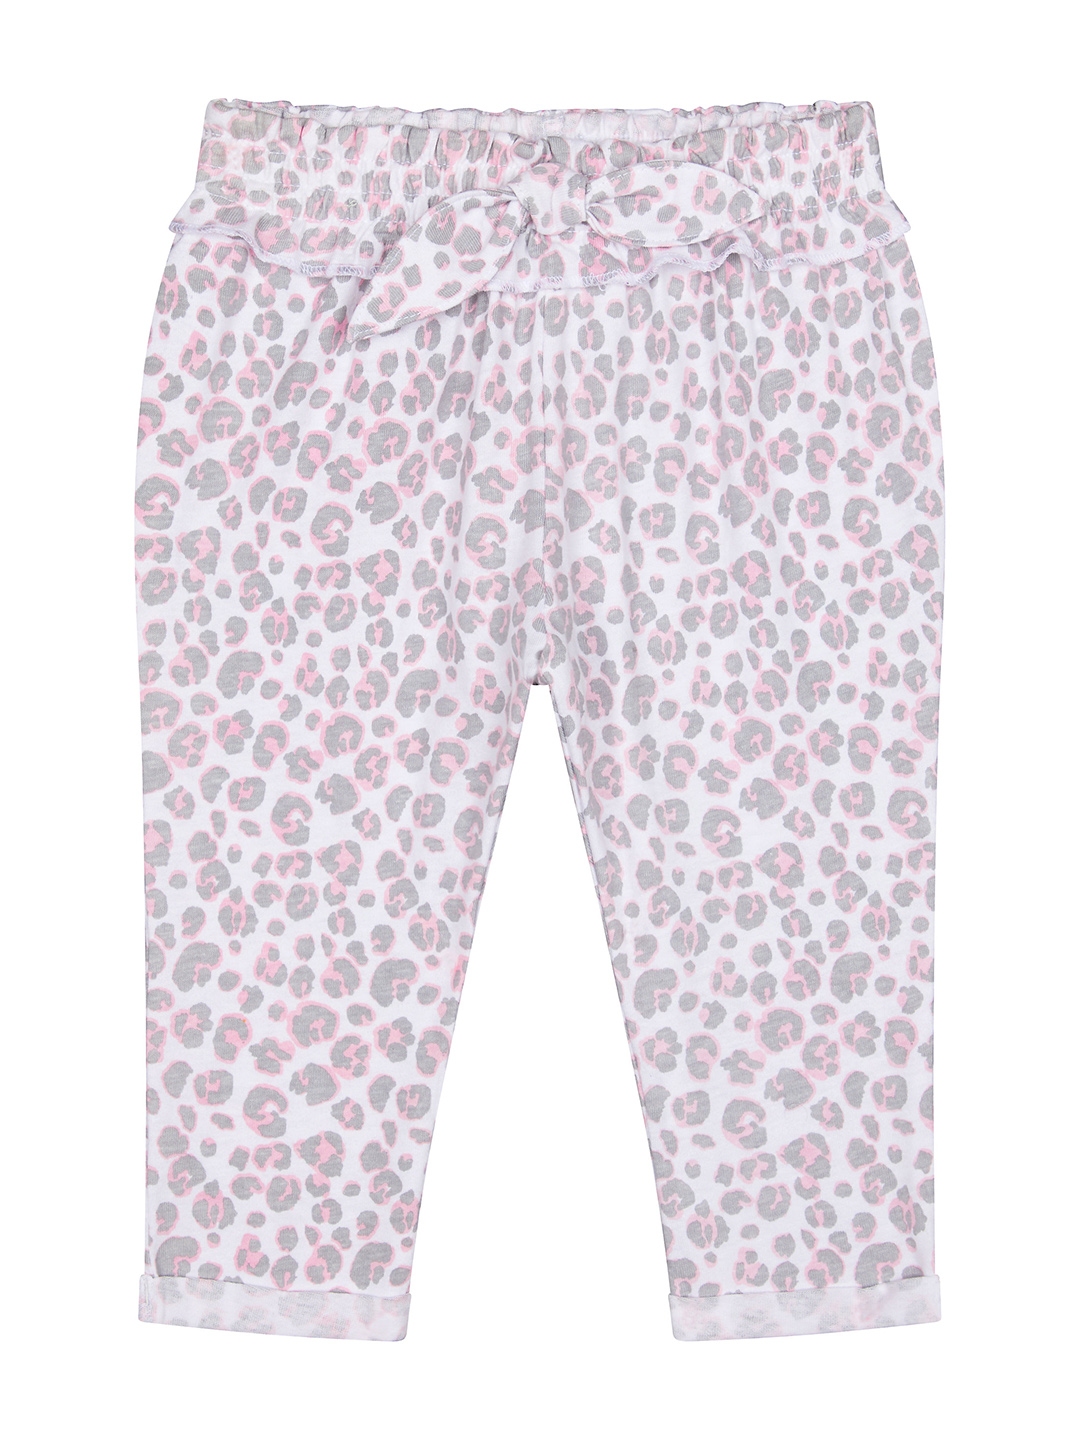 Buy Mothercare Girls White & Pink Animal Printed Trousers - Trousers ...